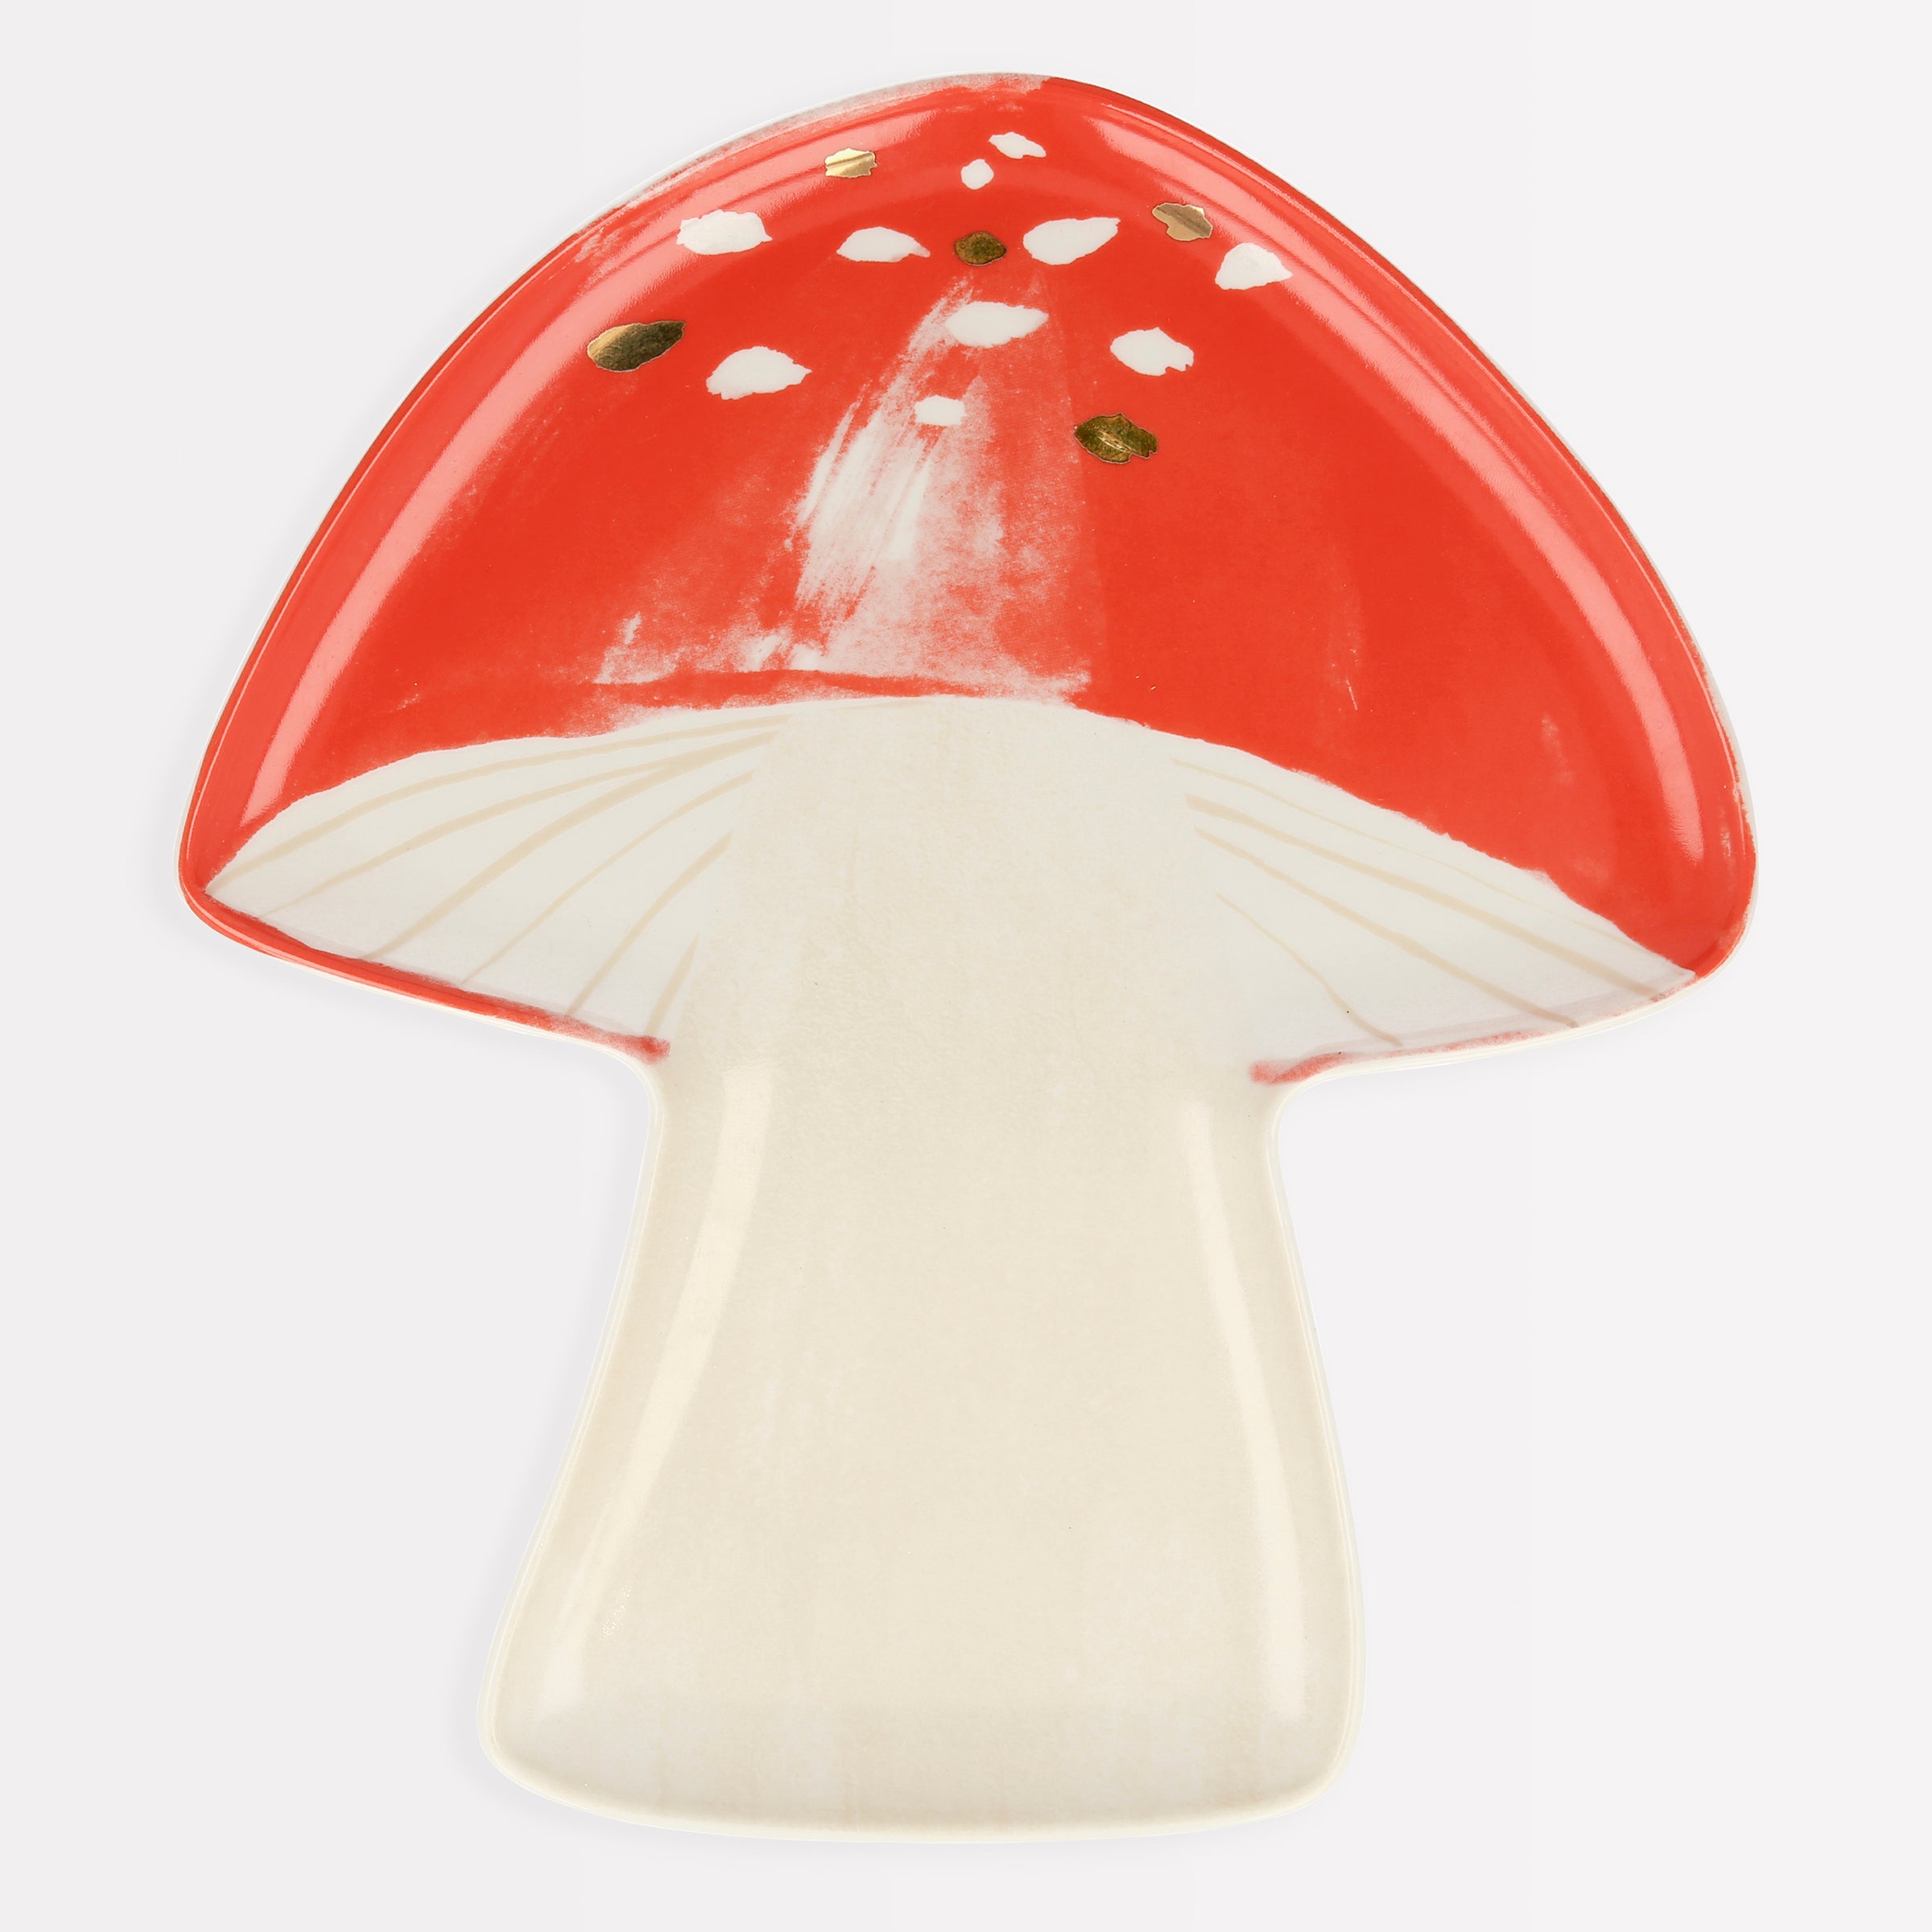 These fabulous mushroom luxury plates are great for a nature theme or for fairy party supplies.